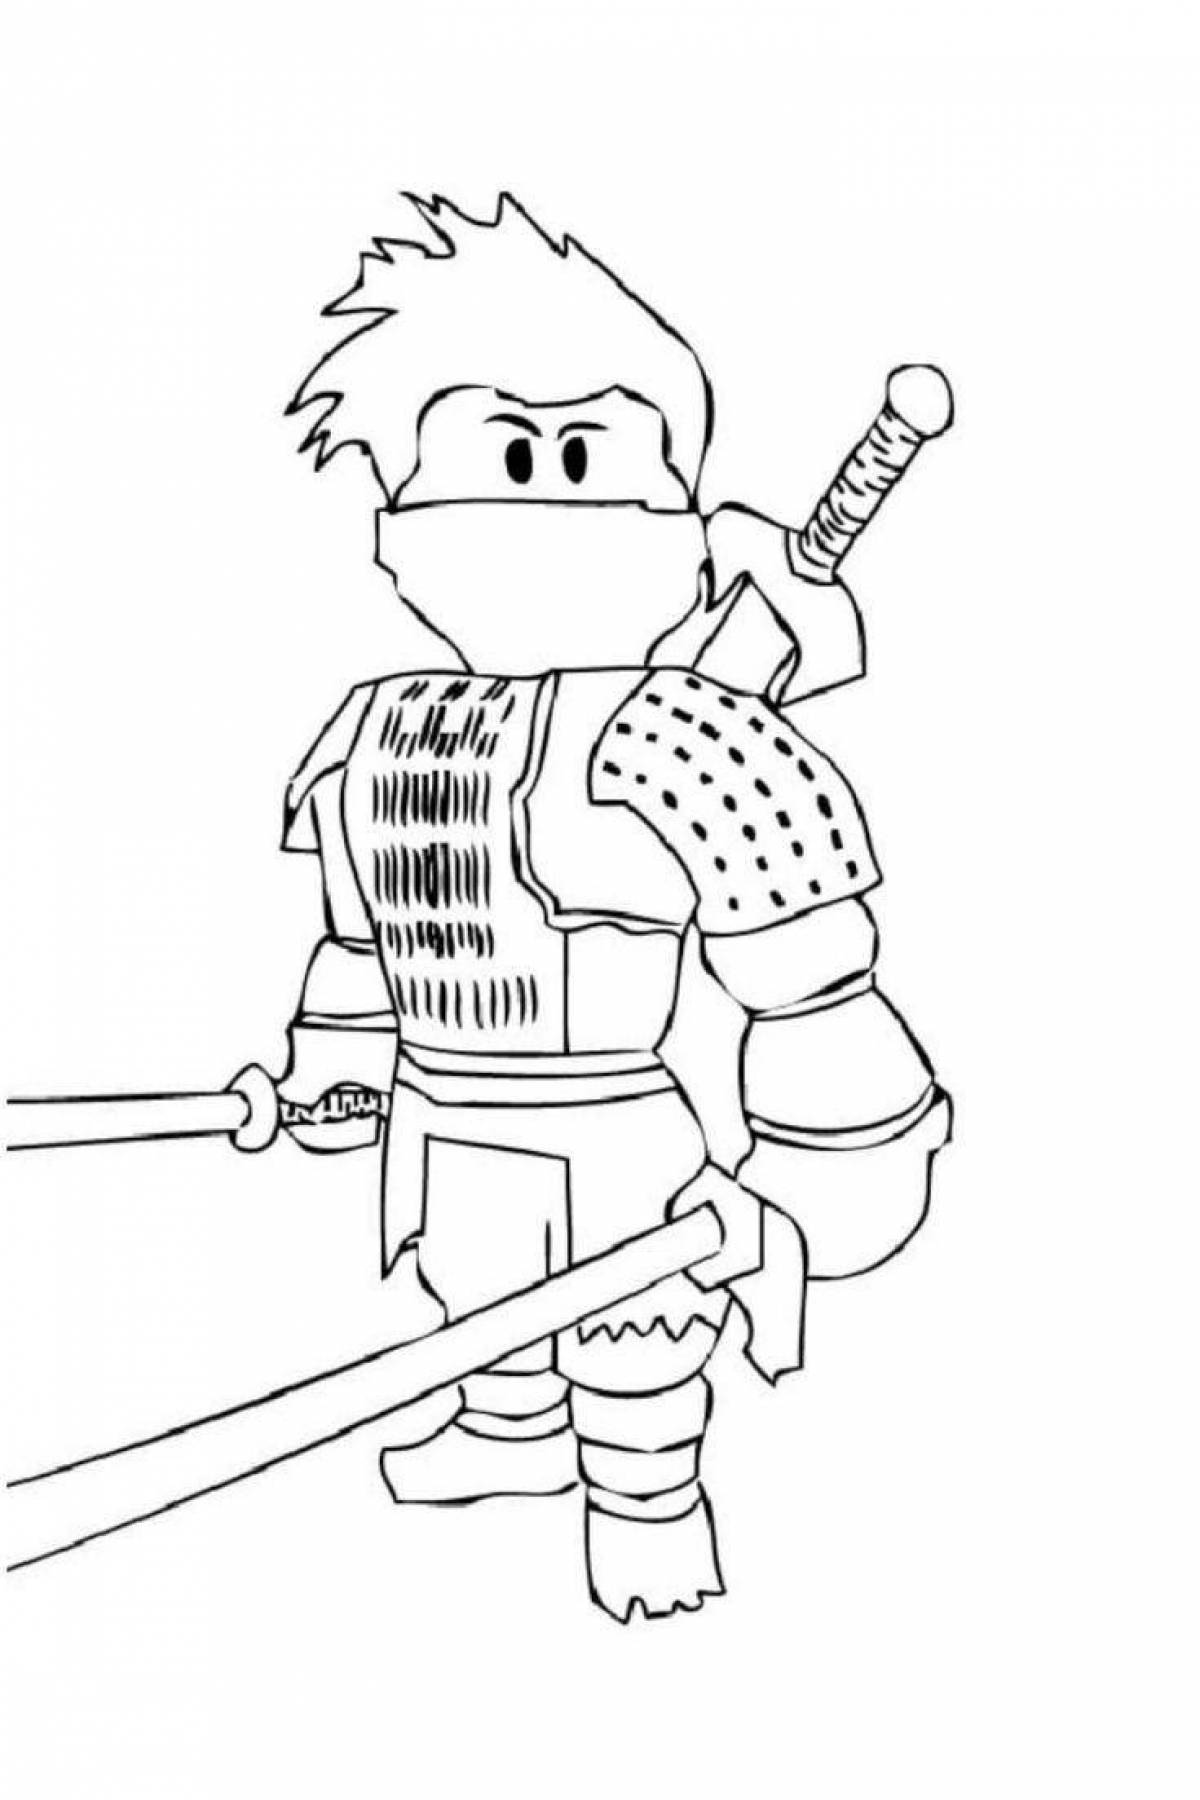 Robloxers creative coloring pages